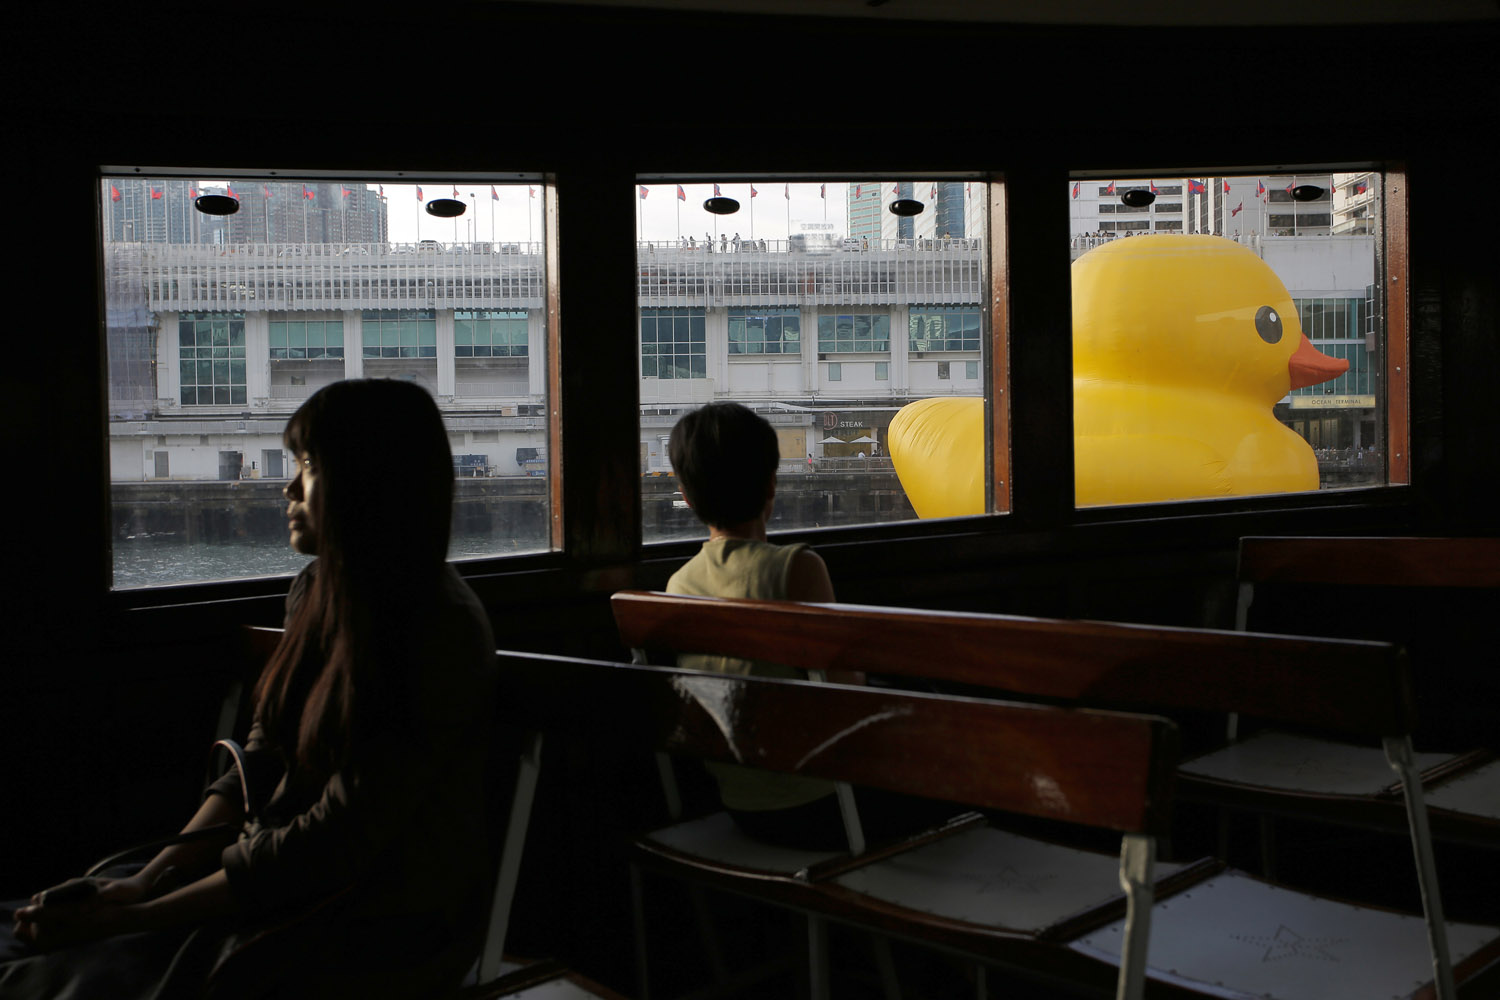 May 29, 2013. A giant rubber duck created by Dutch artist Florentijn Hofman is seen from the window of a star ferry along Hong Kong's Victoria Habour.